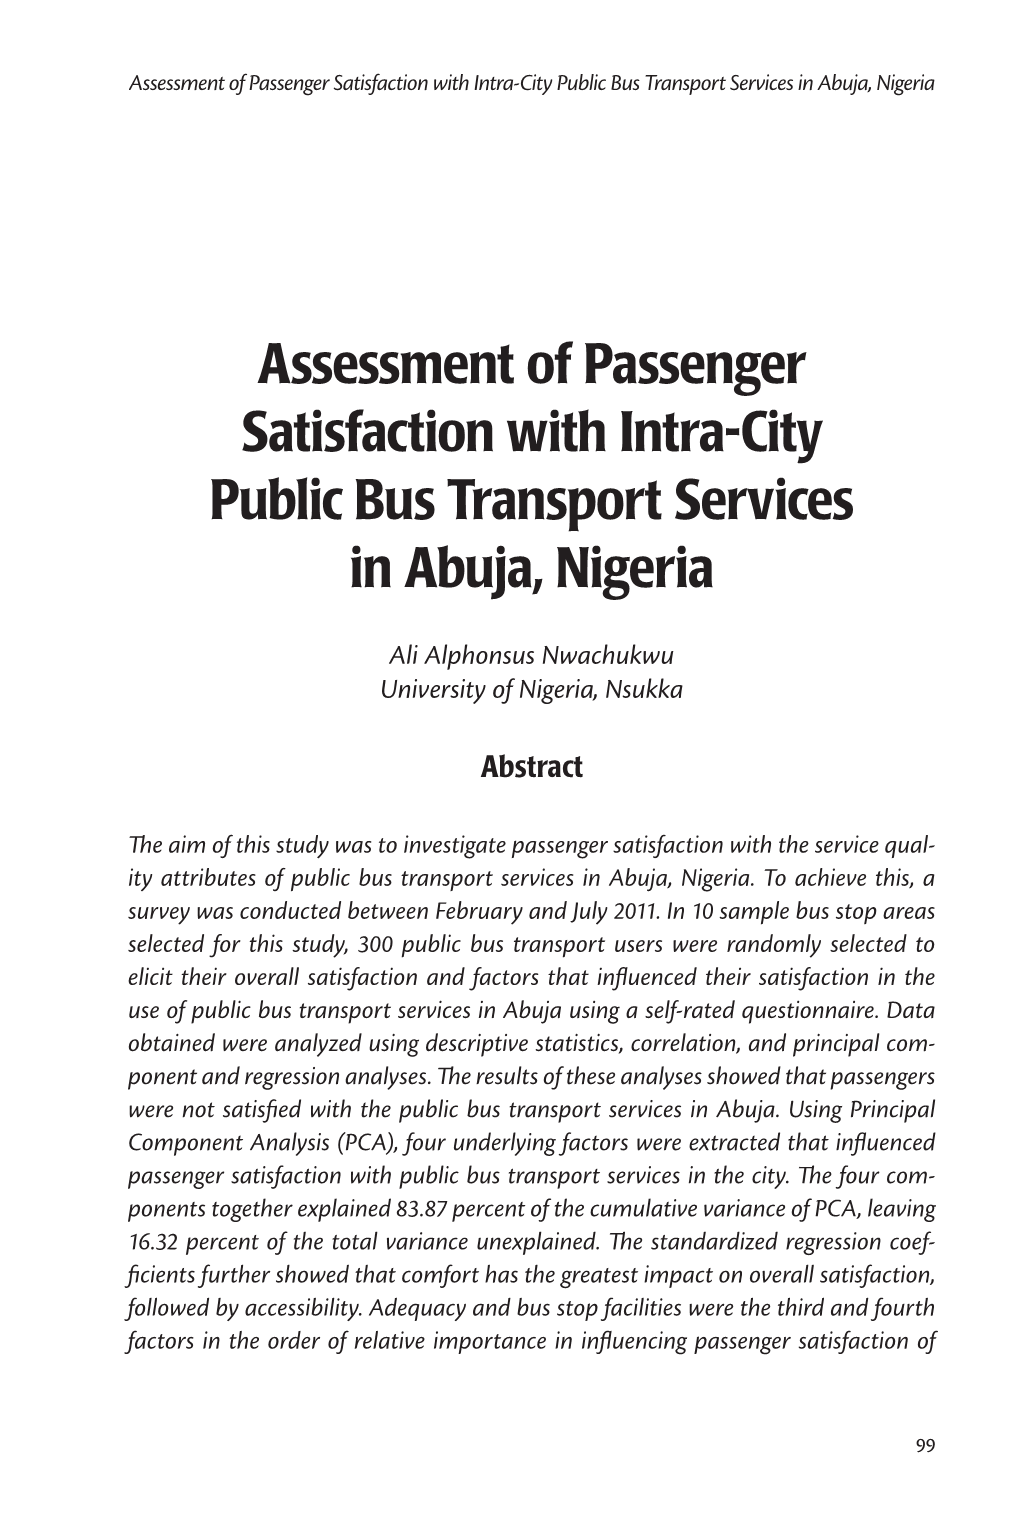 Assessment of Passenger Satisfaction with Intra-City Public Bus Transport Services in Abuja, Nigeria